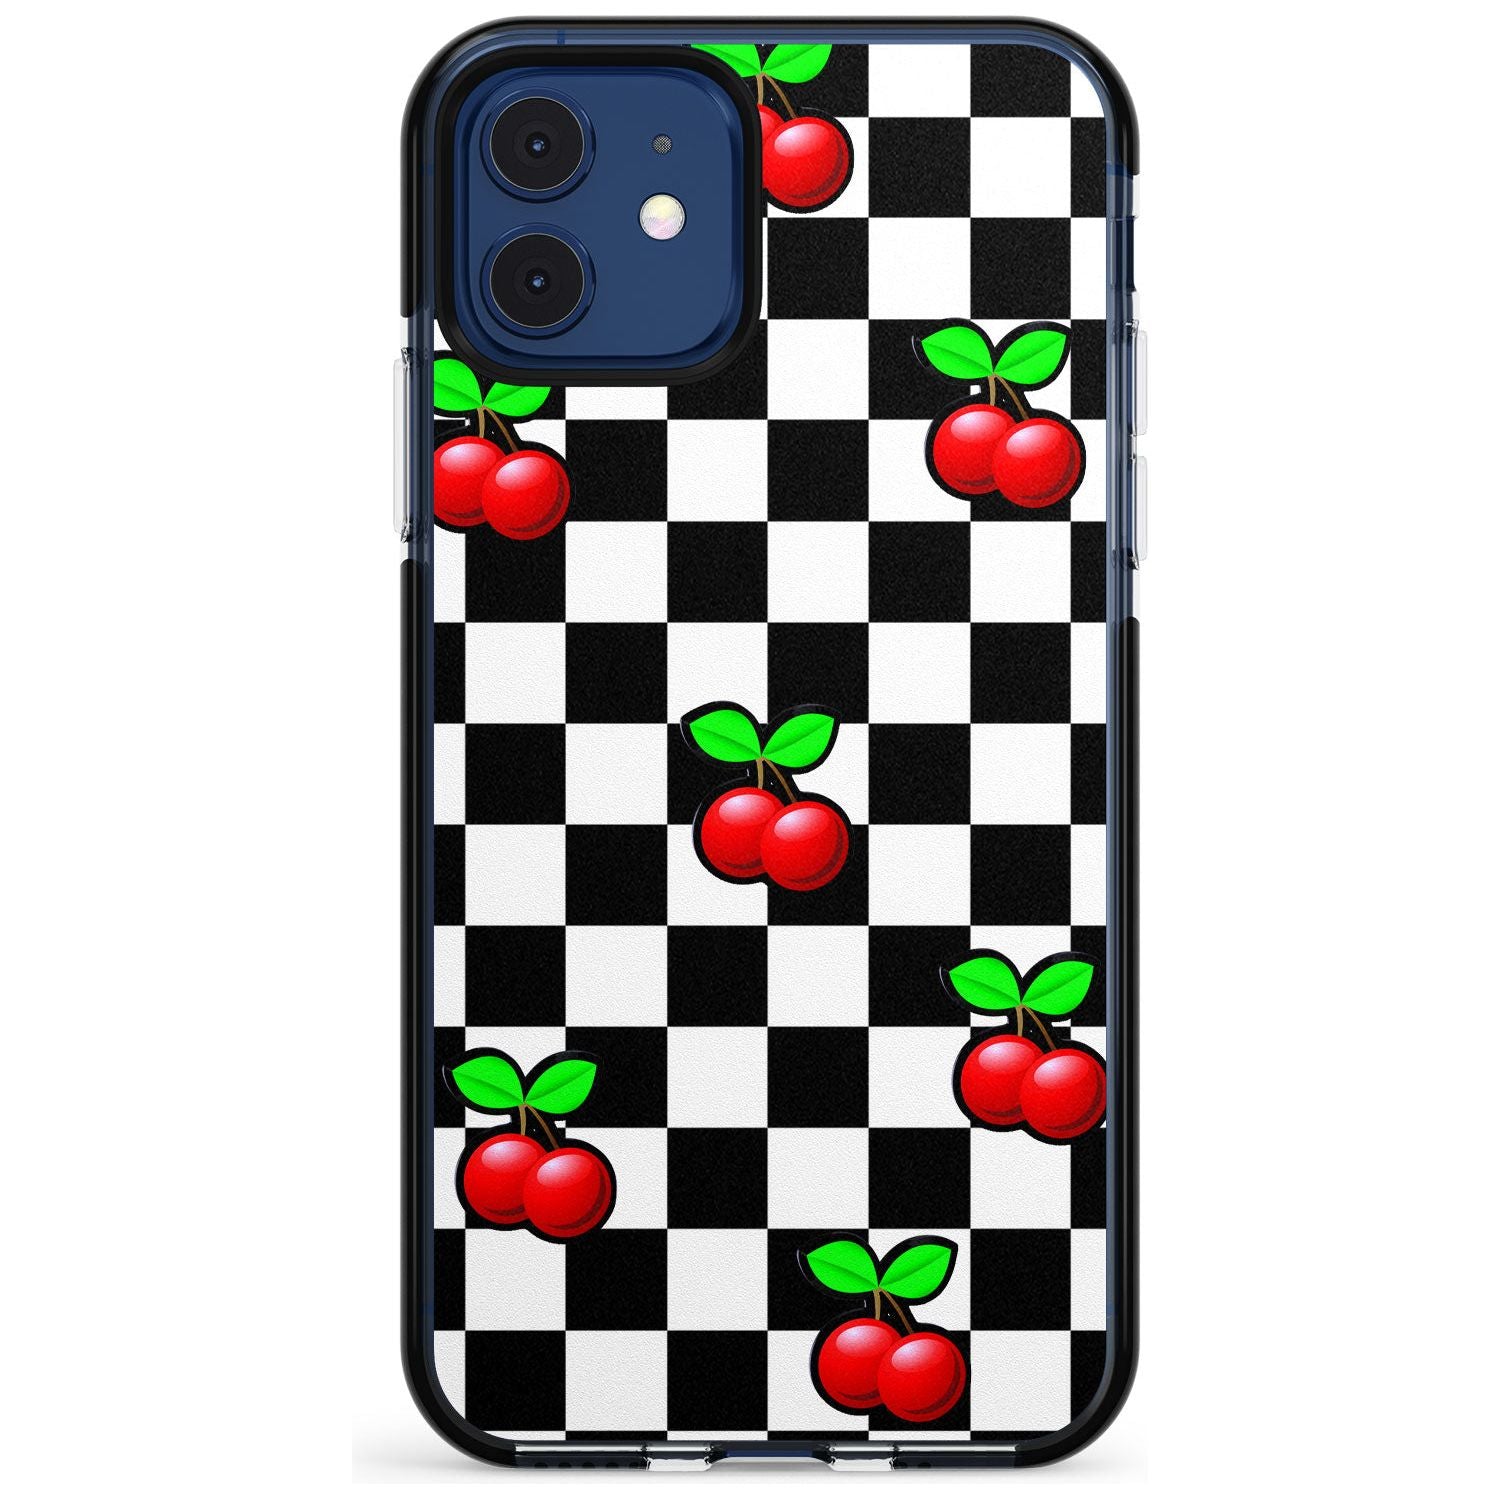 Checkered Cherry Black Impact Phone Case for iPhone 11 Pro Max